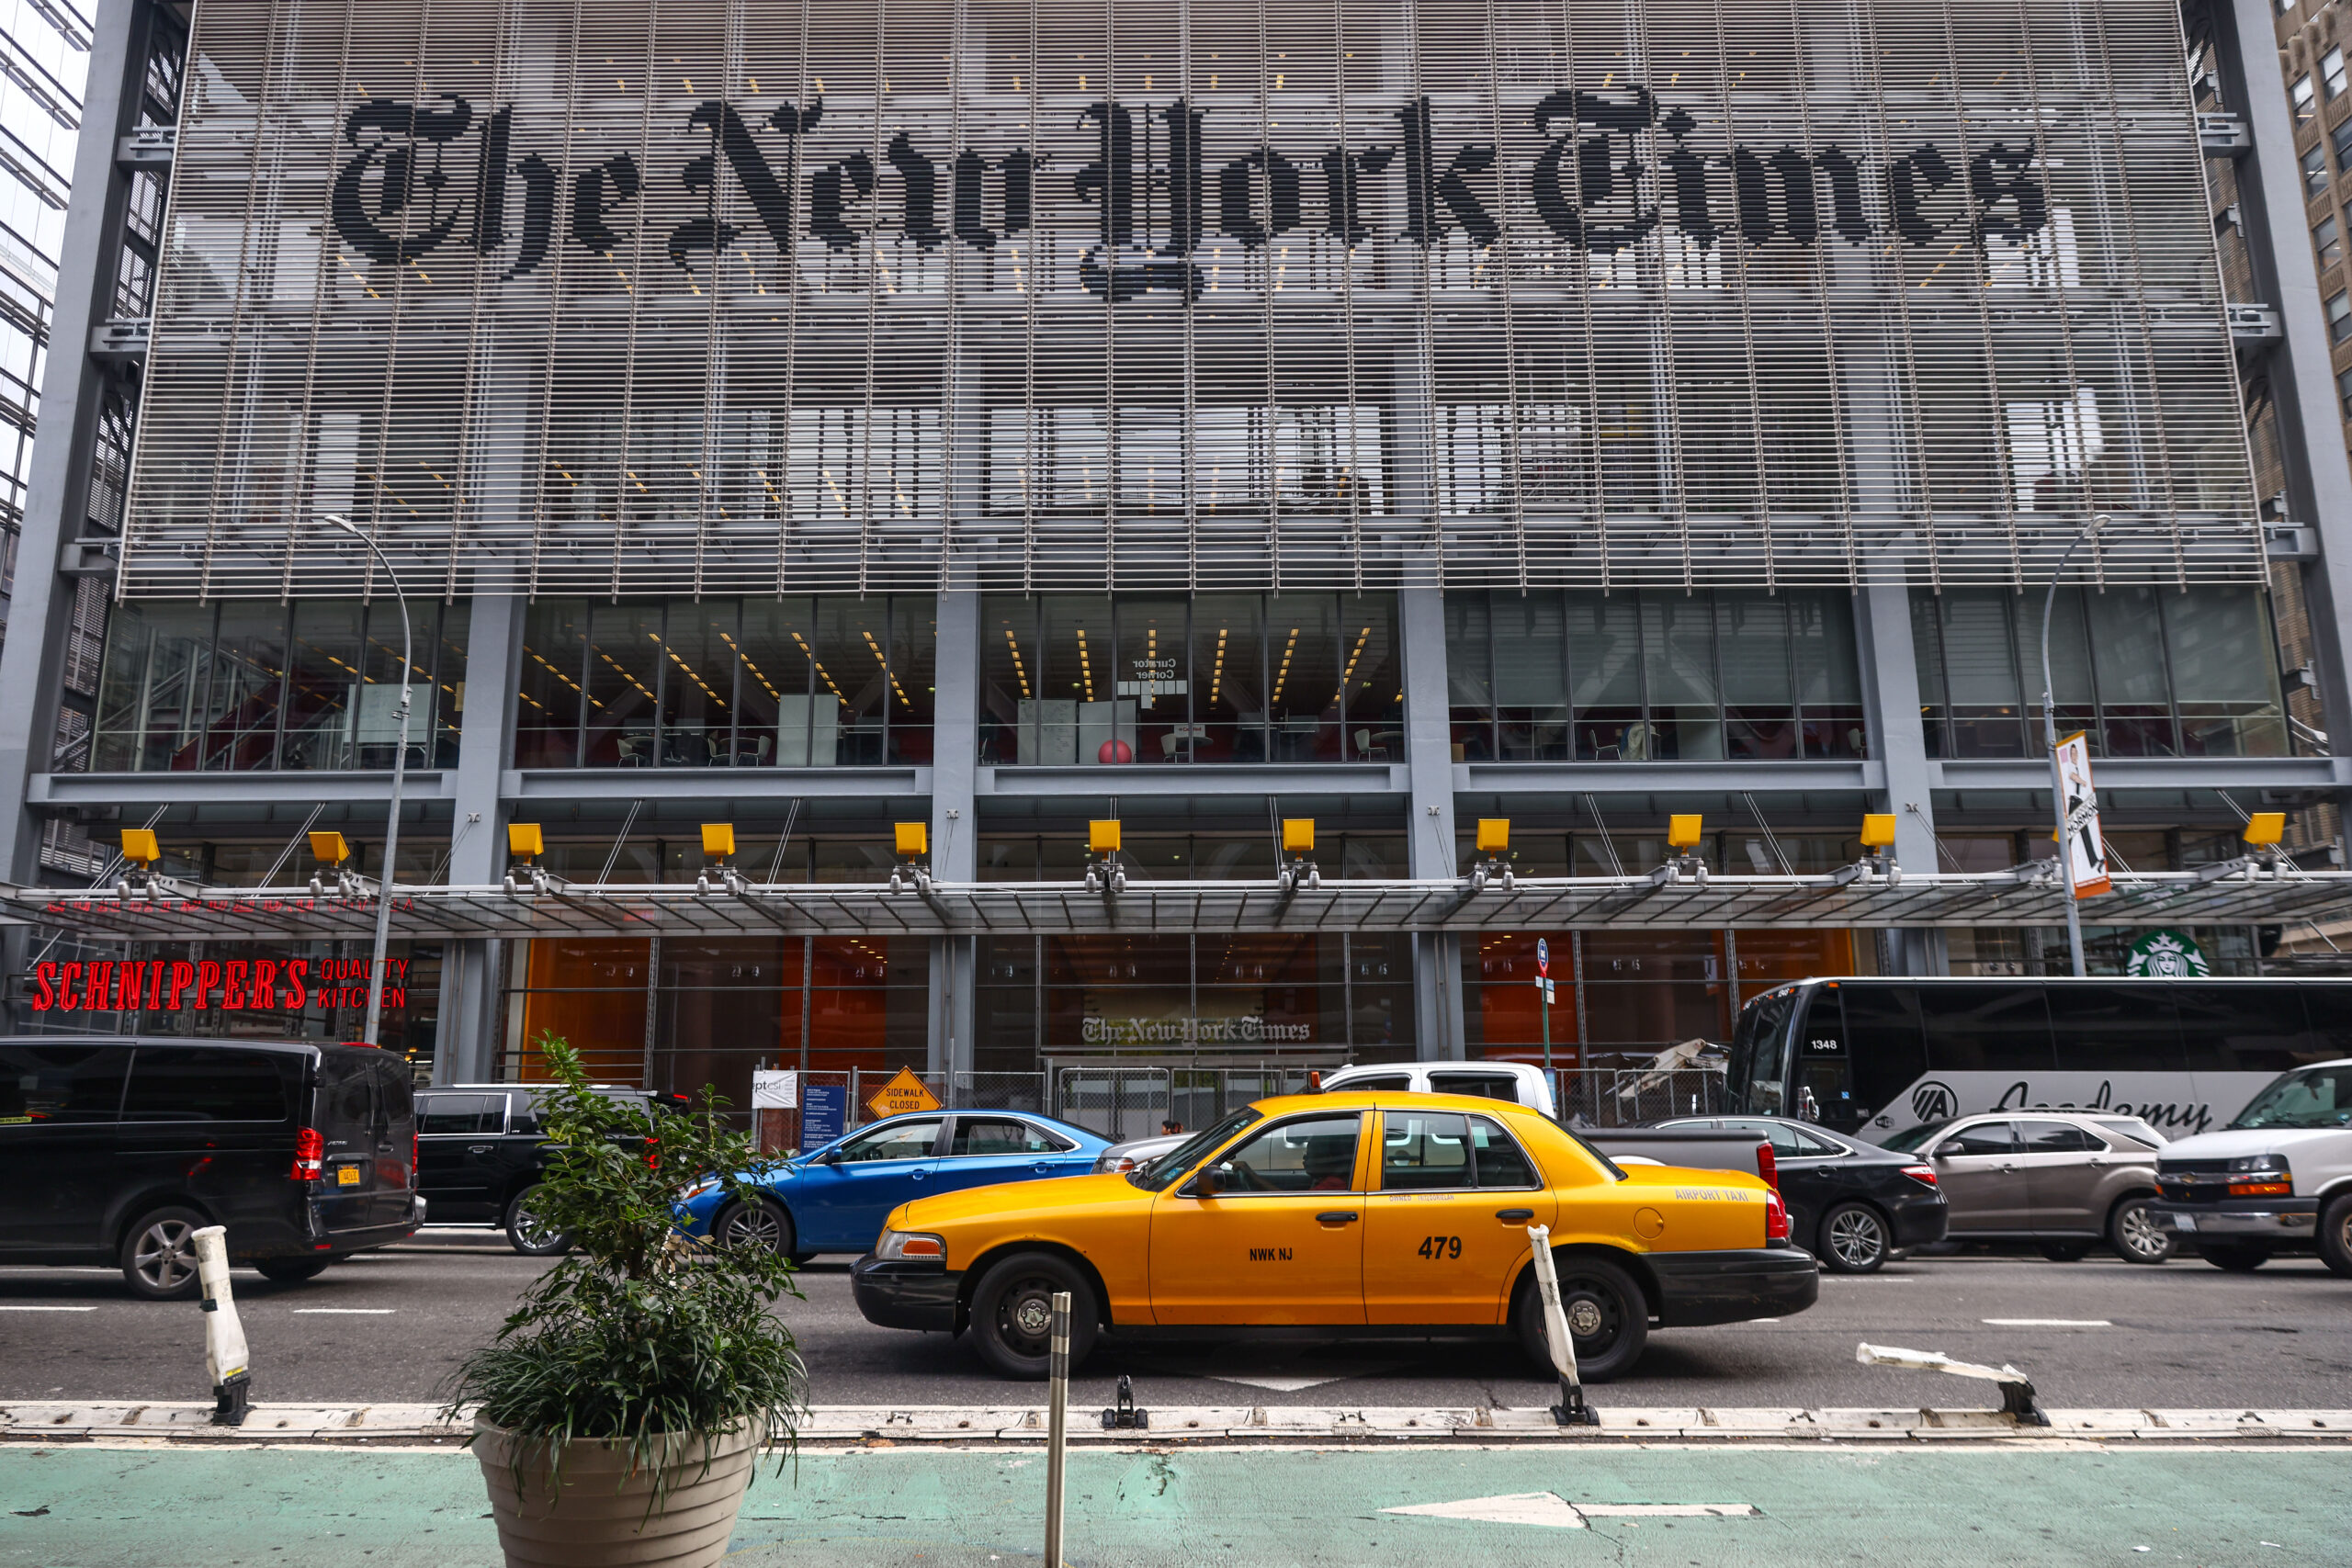 Why The New York Times’ Smear Campaign Against Private Religious Schools Hurts Their Credibility